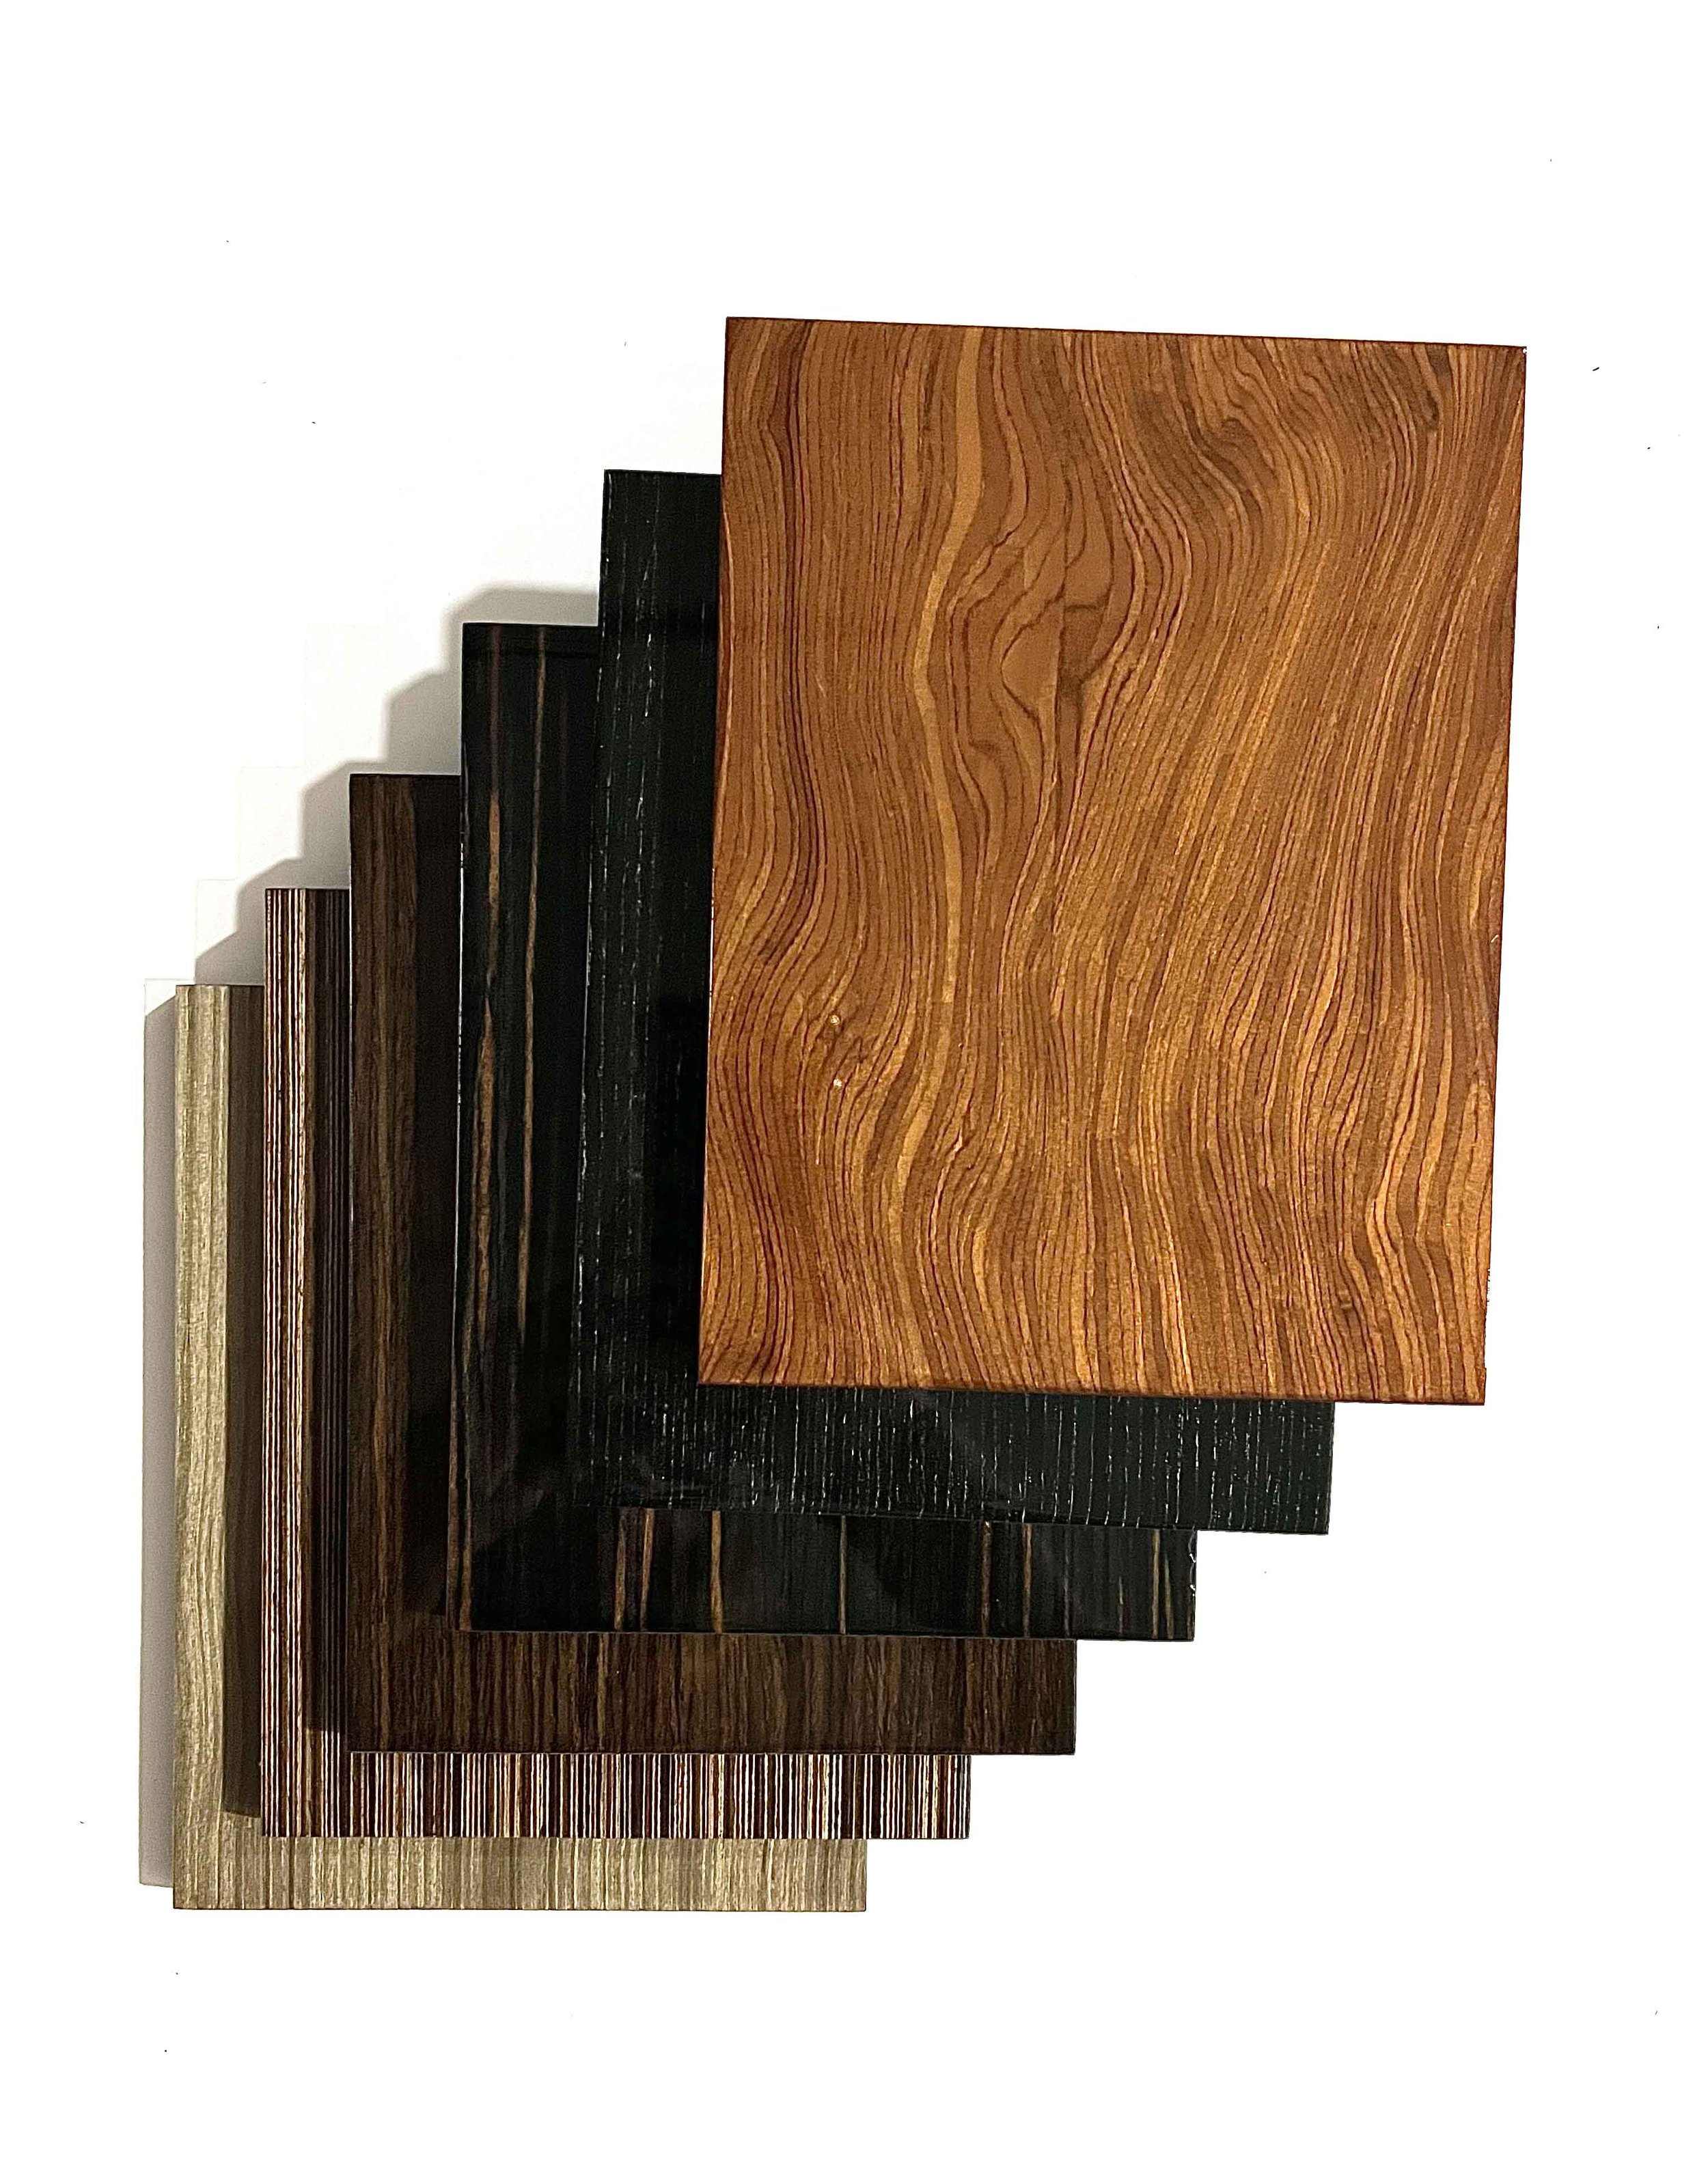 How many types of wood veneer are there? 